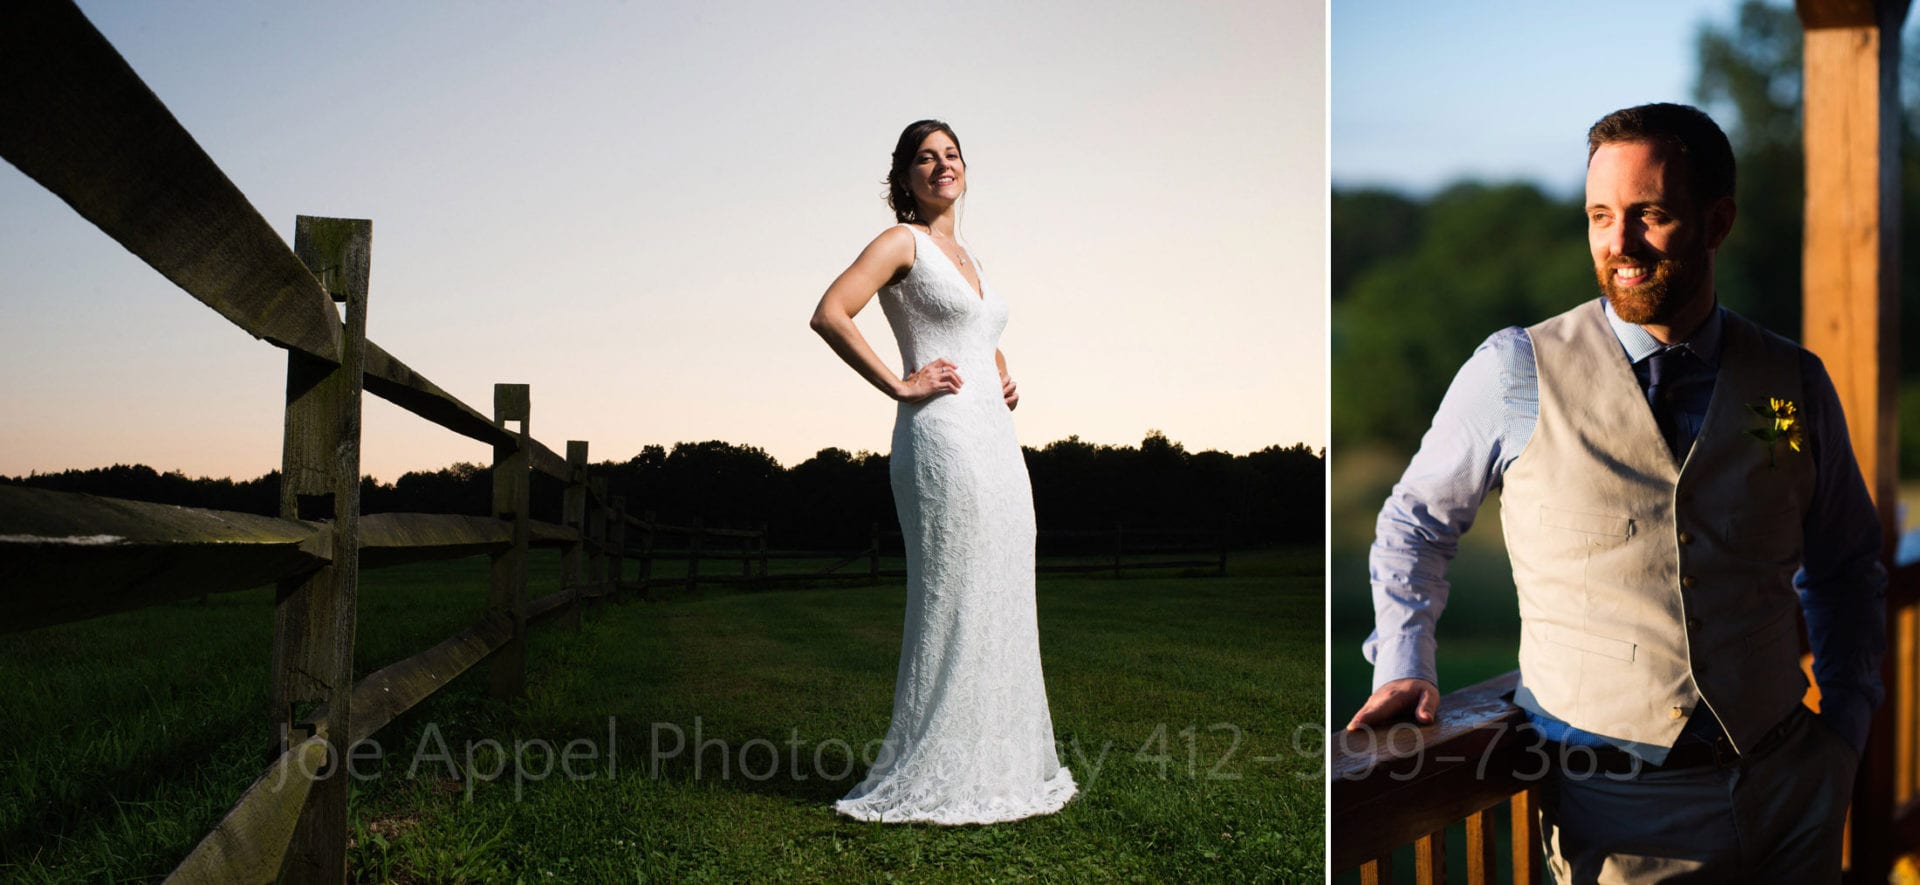 Two photos: A bride wearing a white dress stands next to a split rail fence with her hands on her hips as the sun sets behind her. The second photo is a groom wearing a tan vest and blue shirt leaning against the railing of a porch as he is lit by the evening sun.